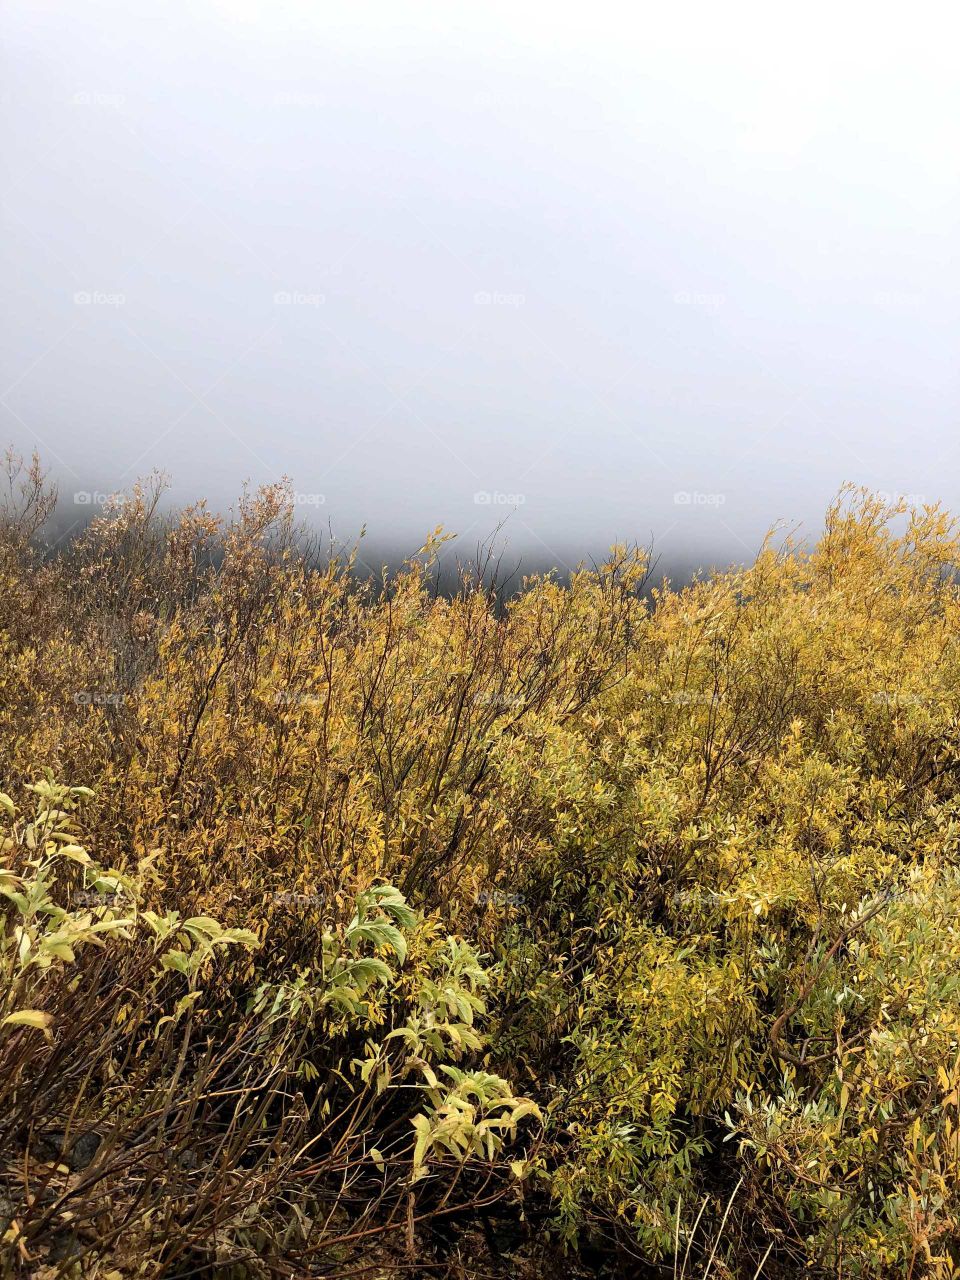 gold colored shrubs in the foreground of a misty backdrop